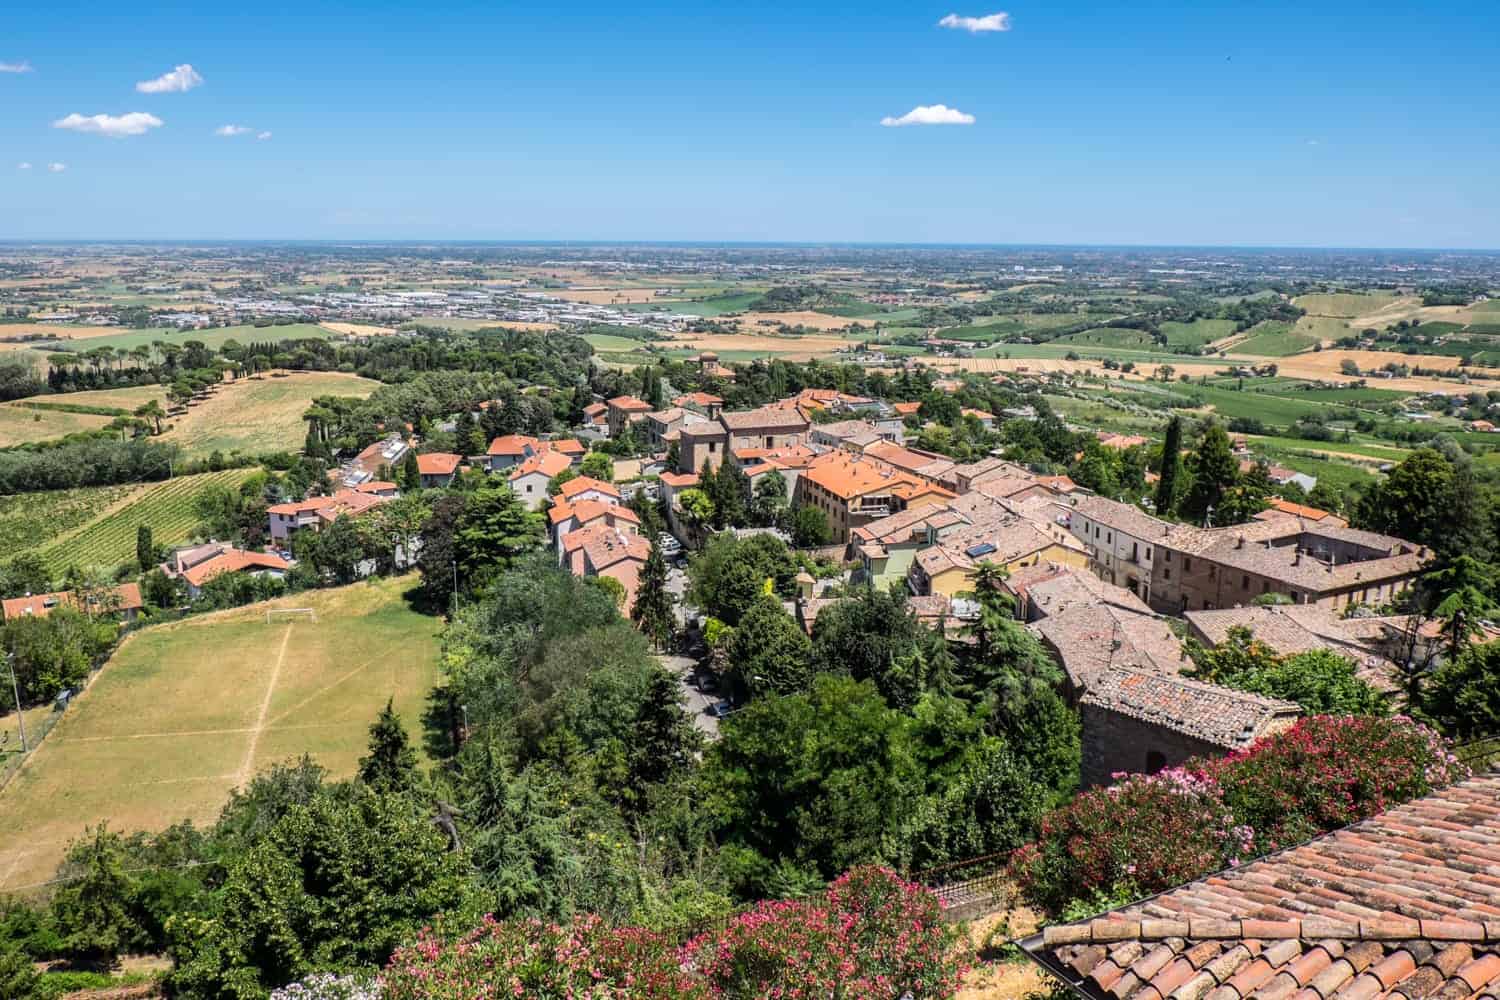 Views of Bertinoro, the town next to Forlimpopoli in Italy